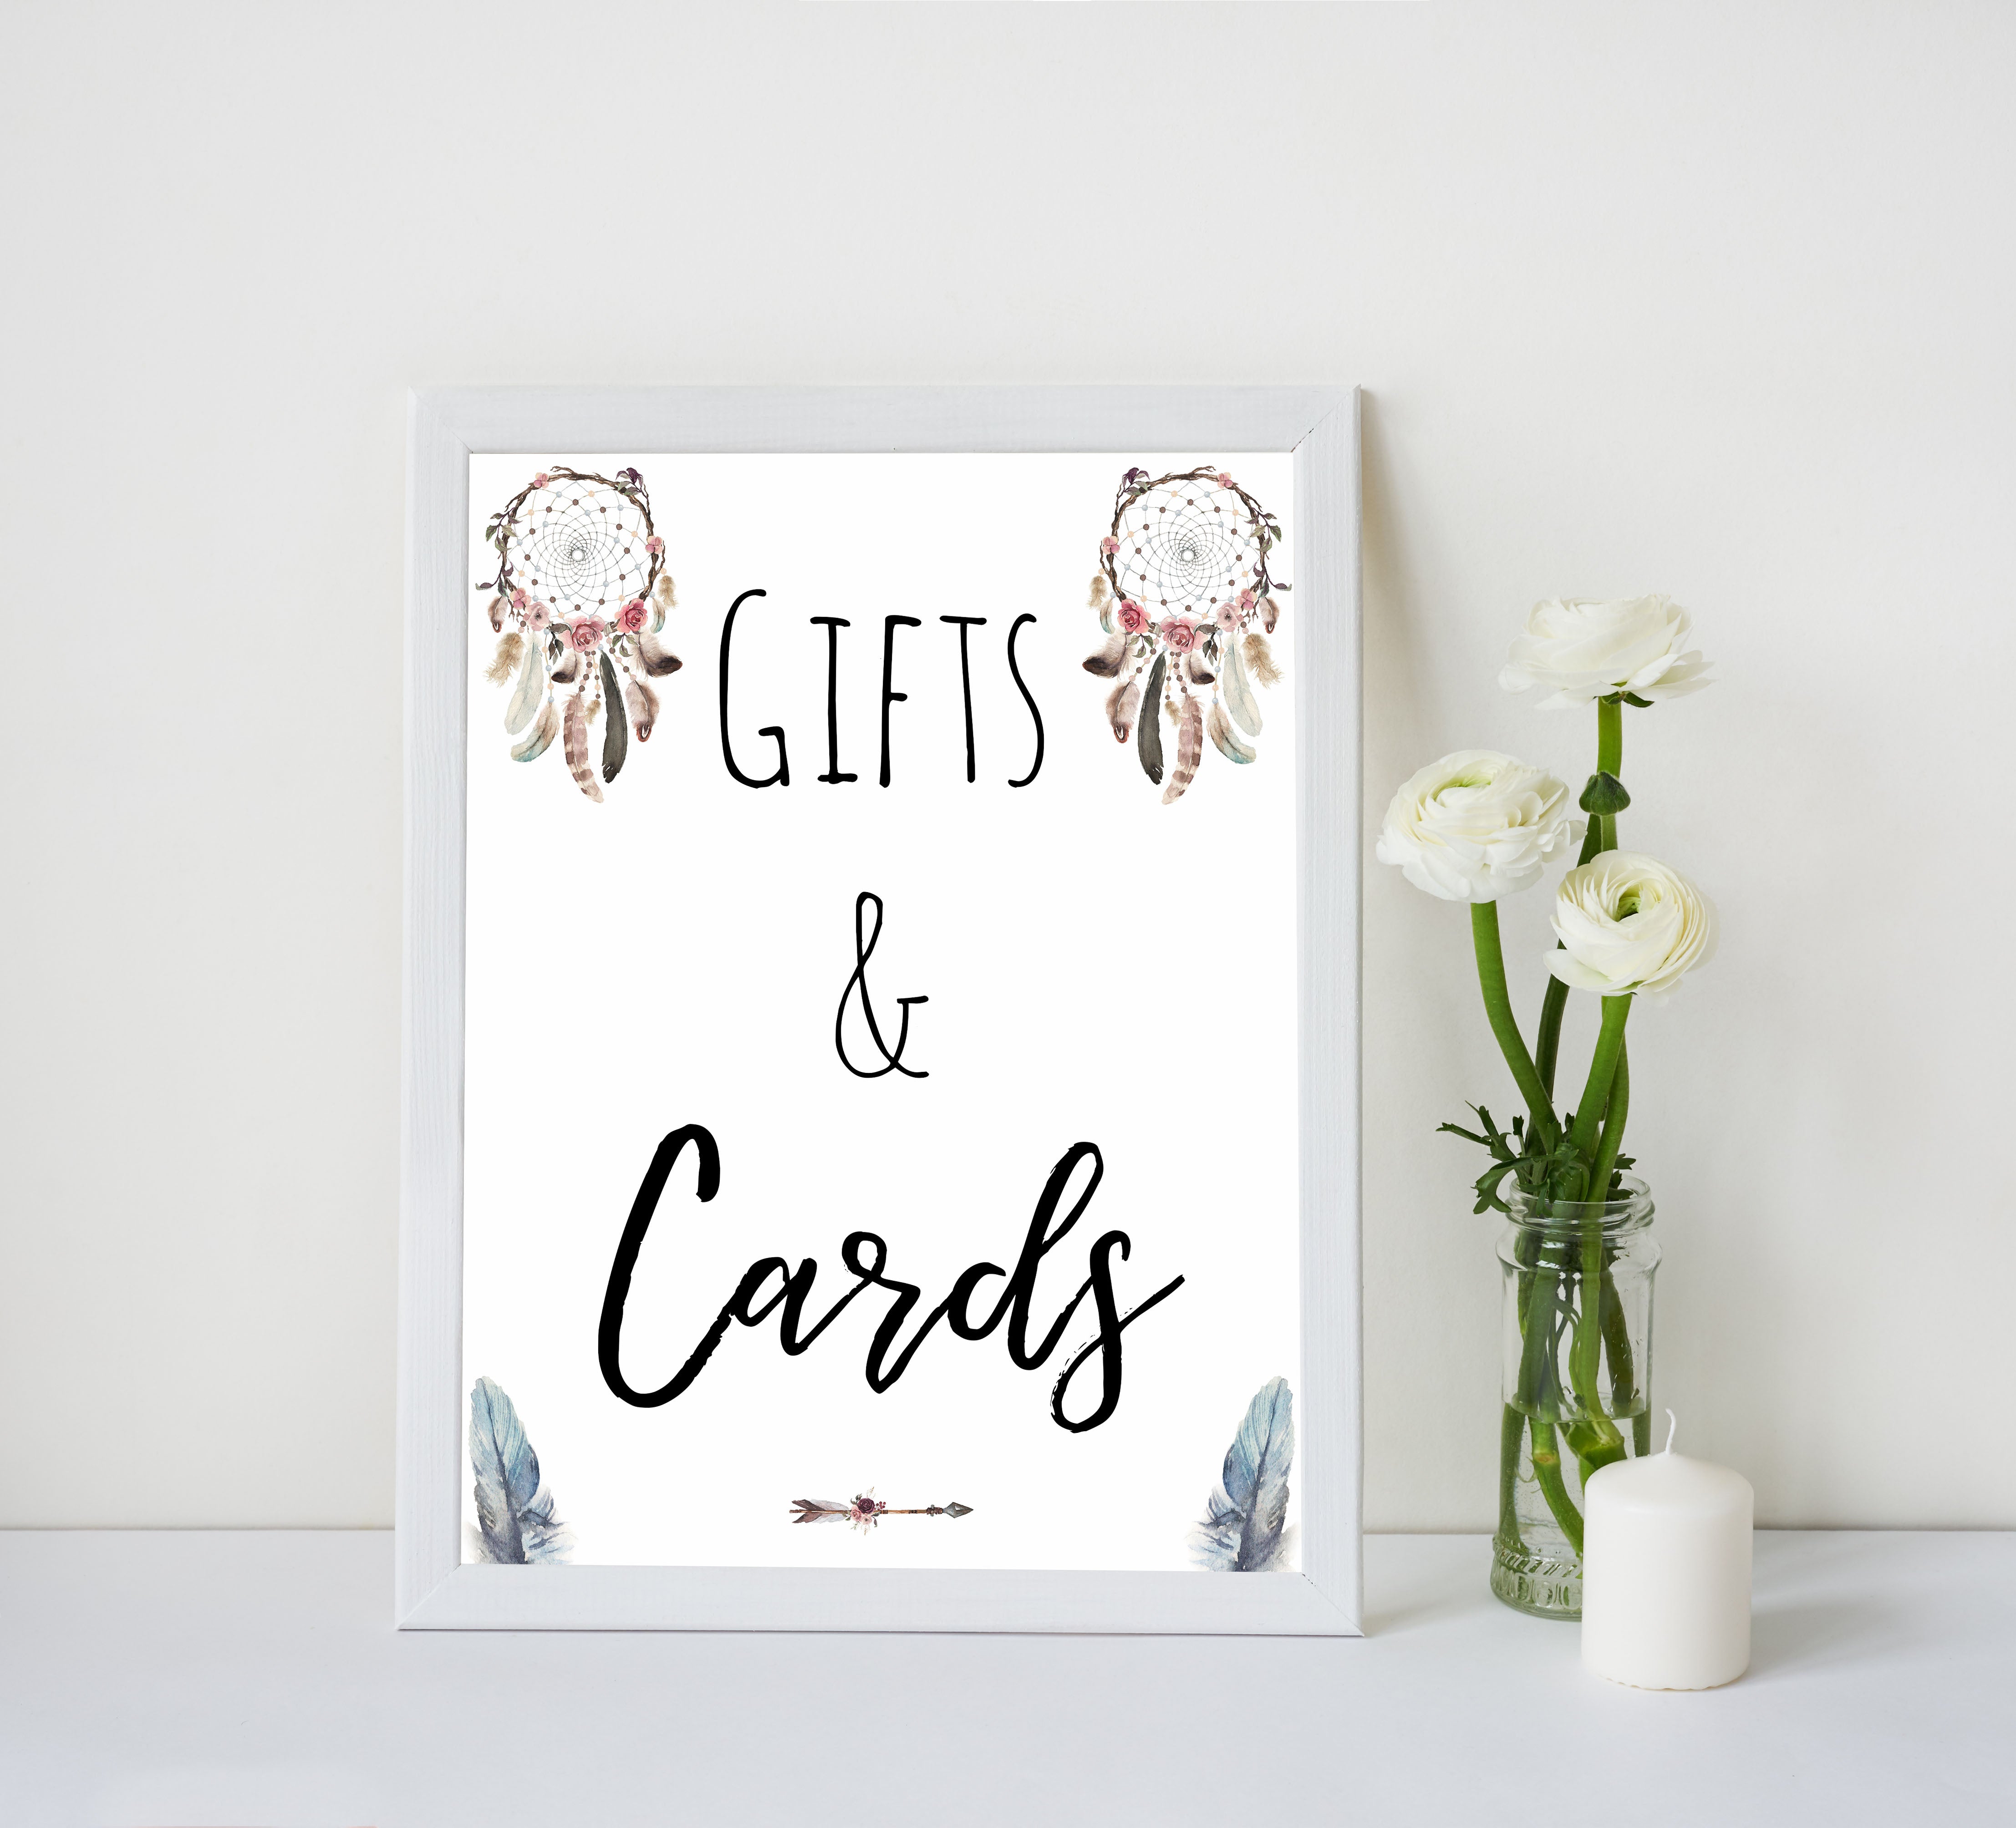 boho baby signs, gifts and cards baby signs, printable baby signs, boho baby decor, fun baby signs, baby shower signs, baby shower decor